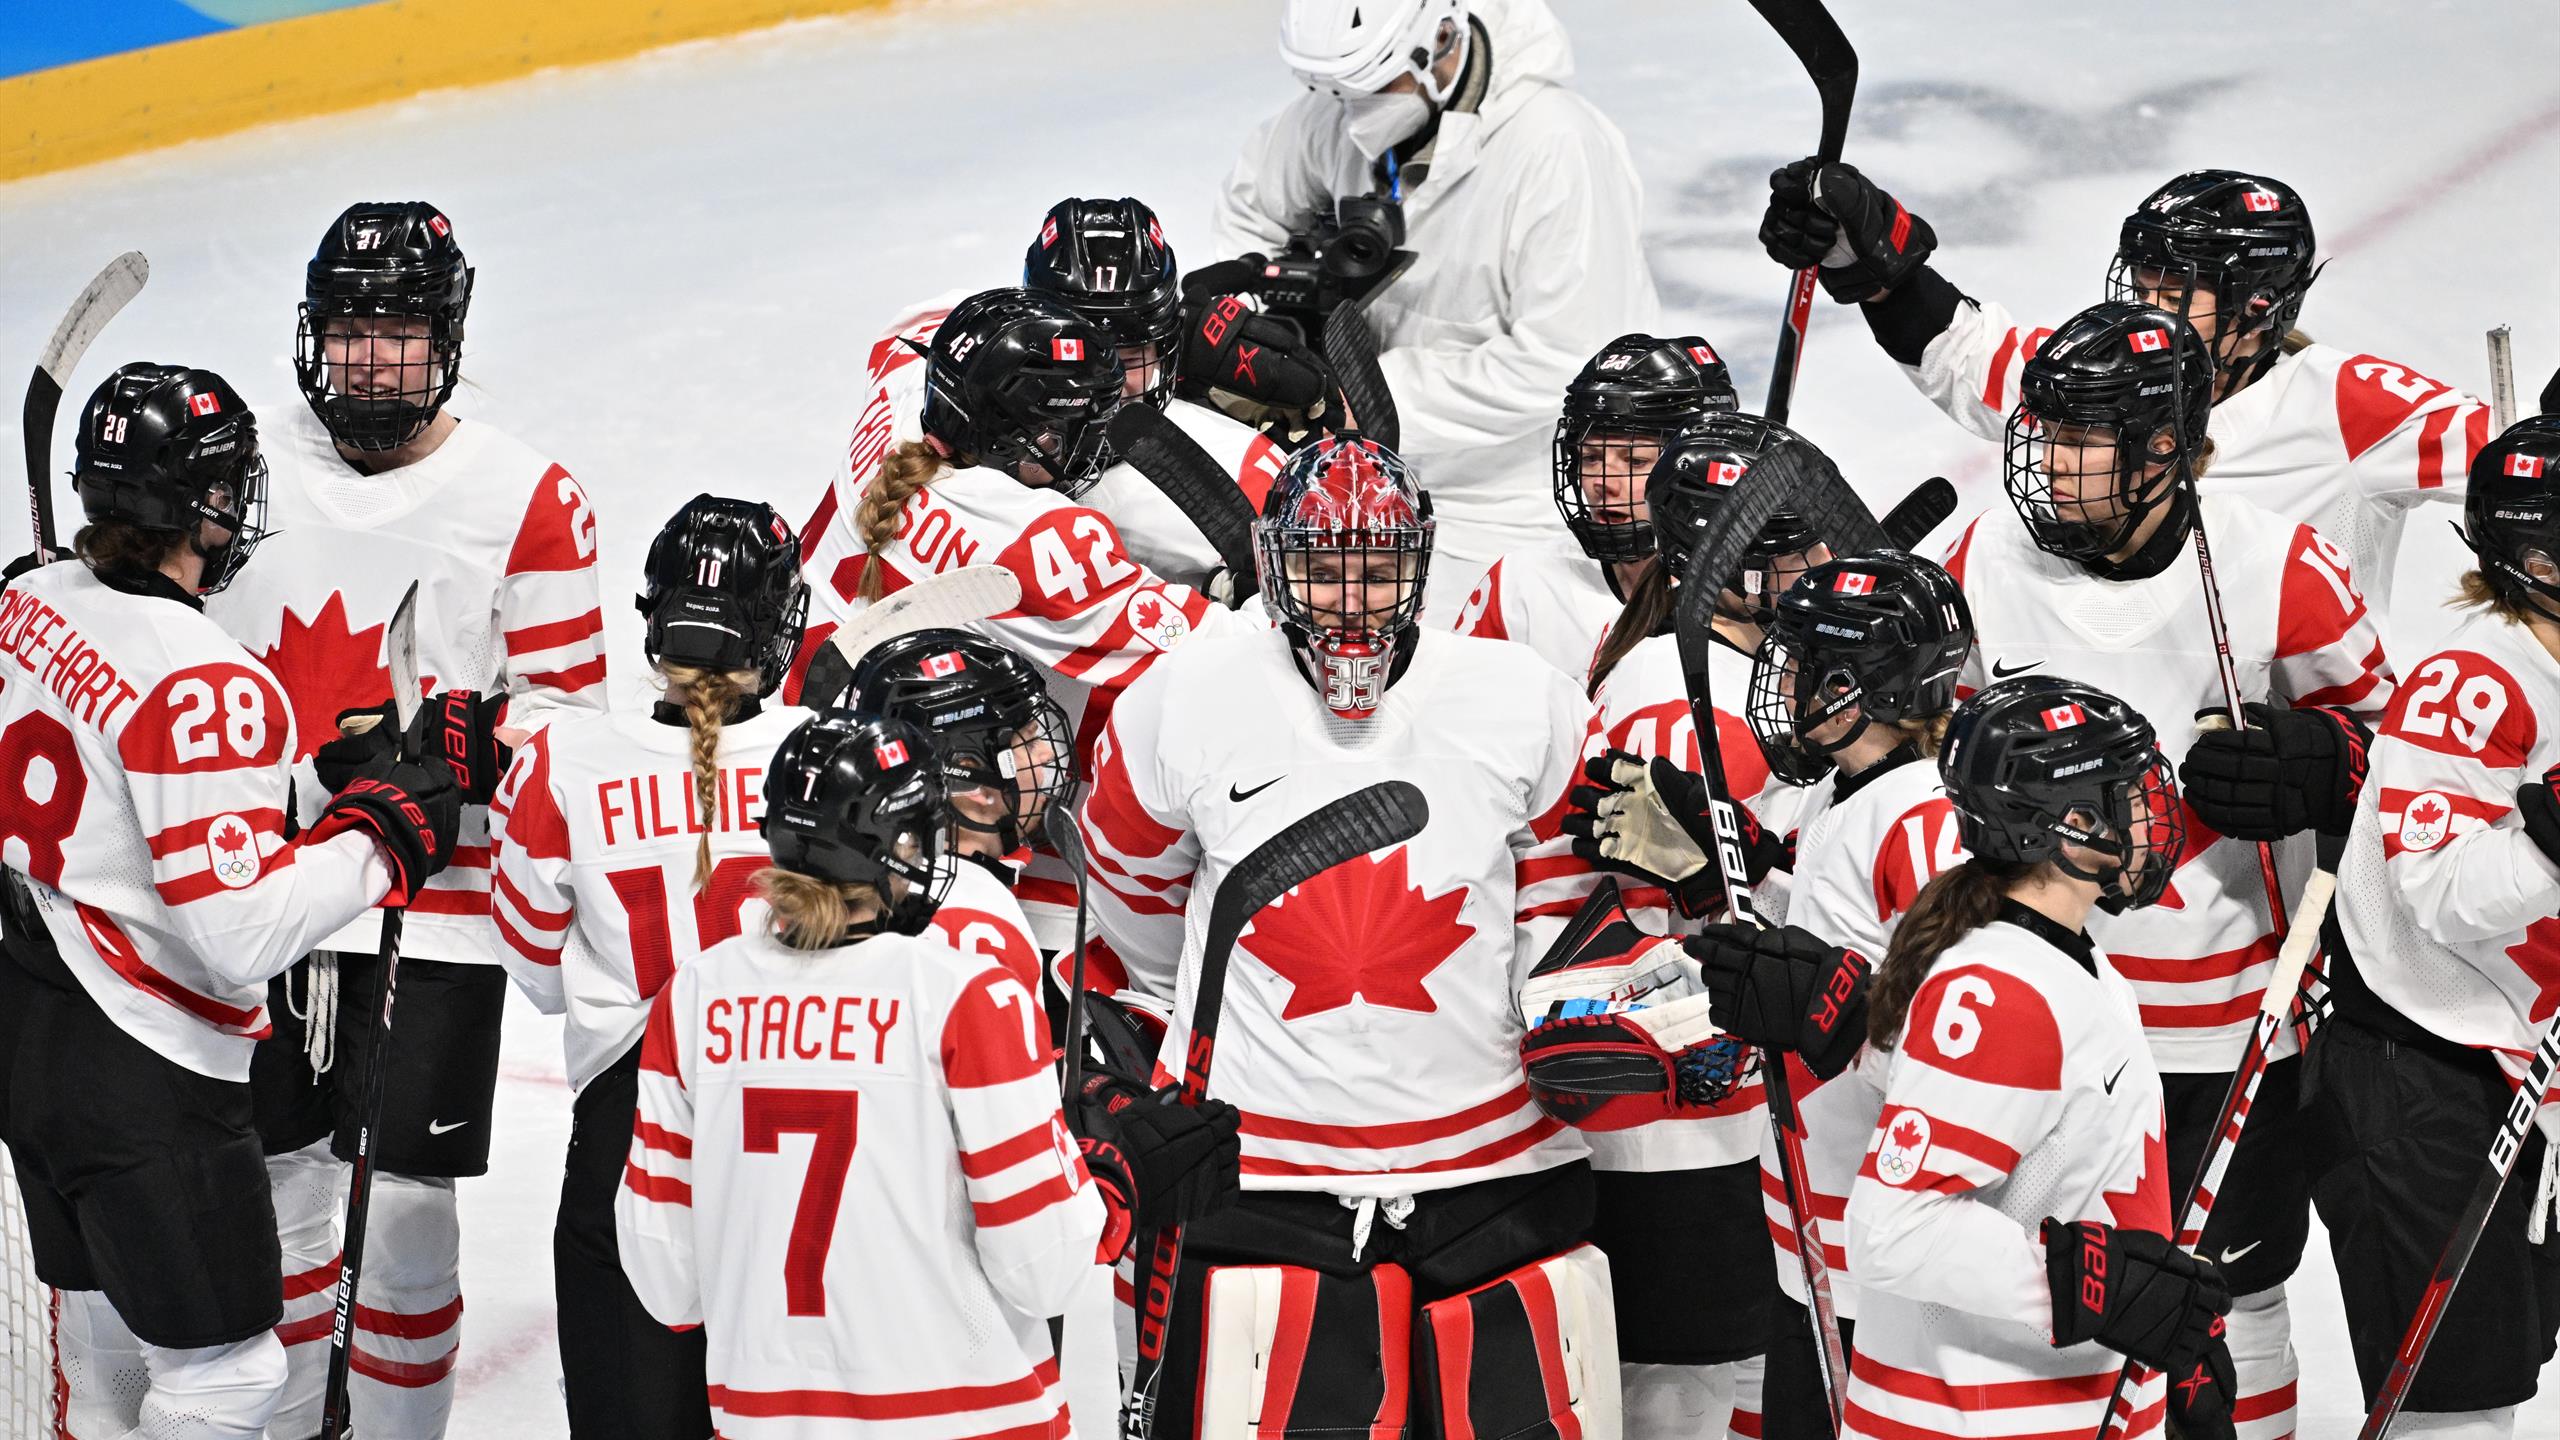 Sixth time: Ice hockey final with Canadian and American women